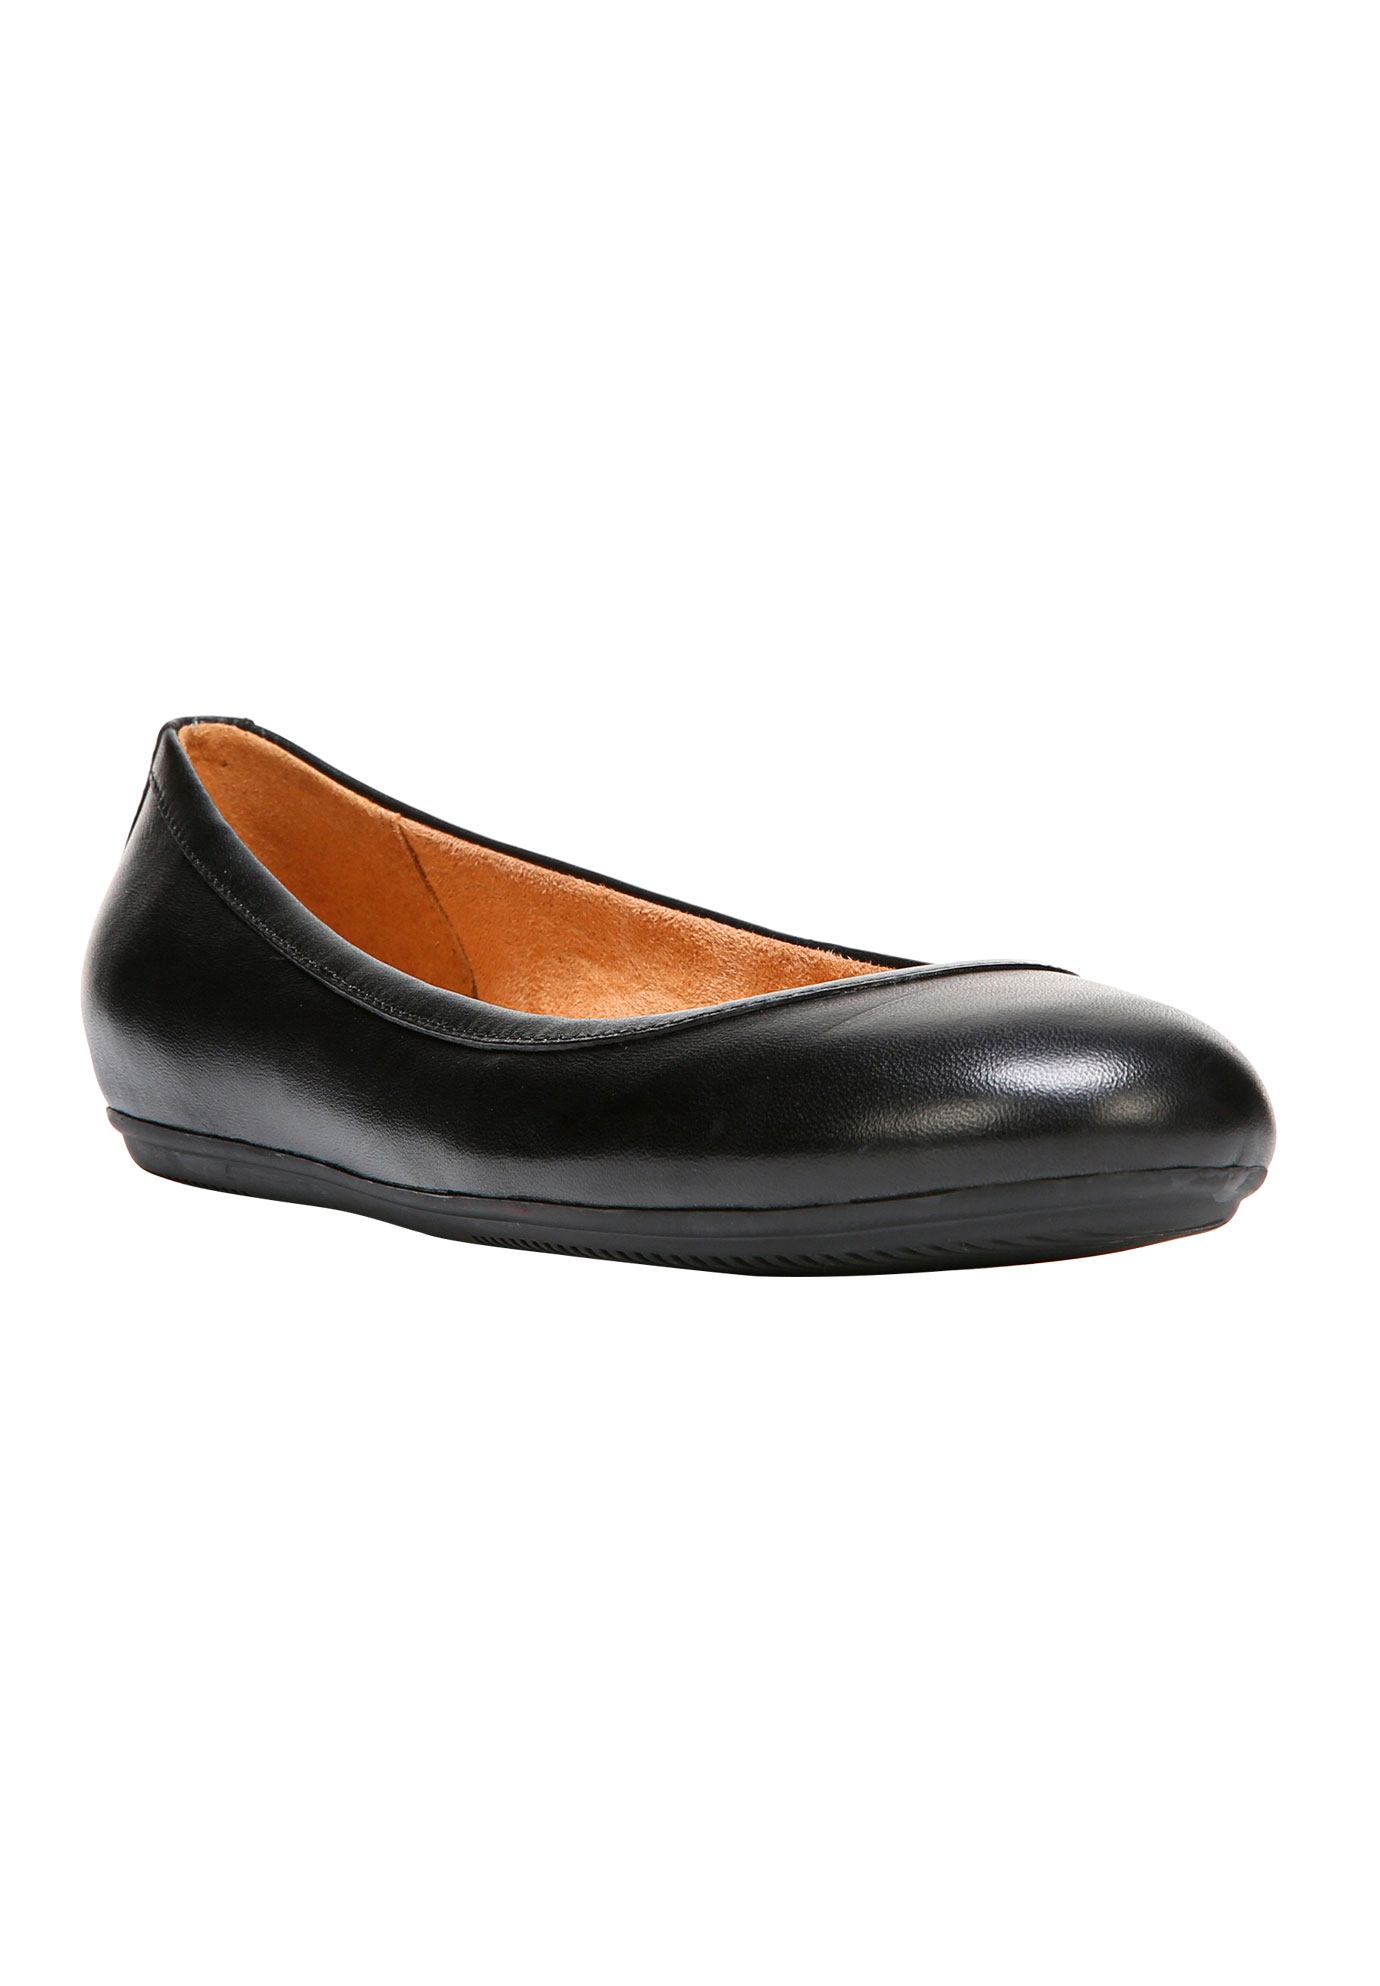 Brittany Flats by Naturalizer® | Jessica London